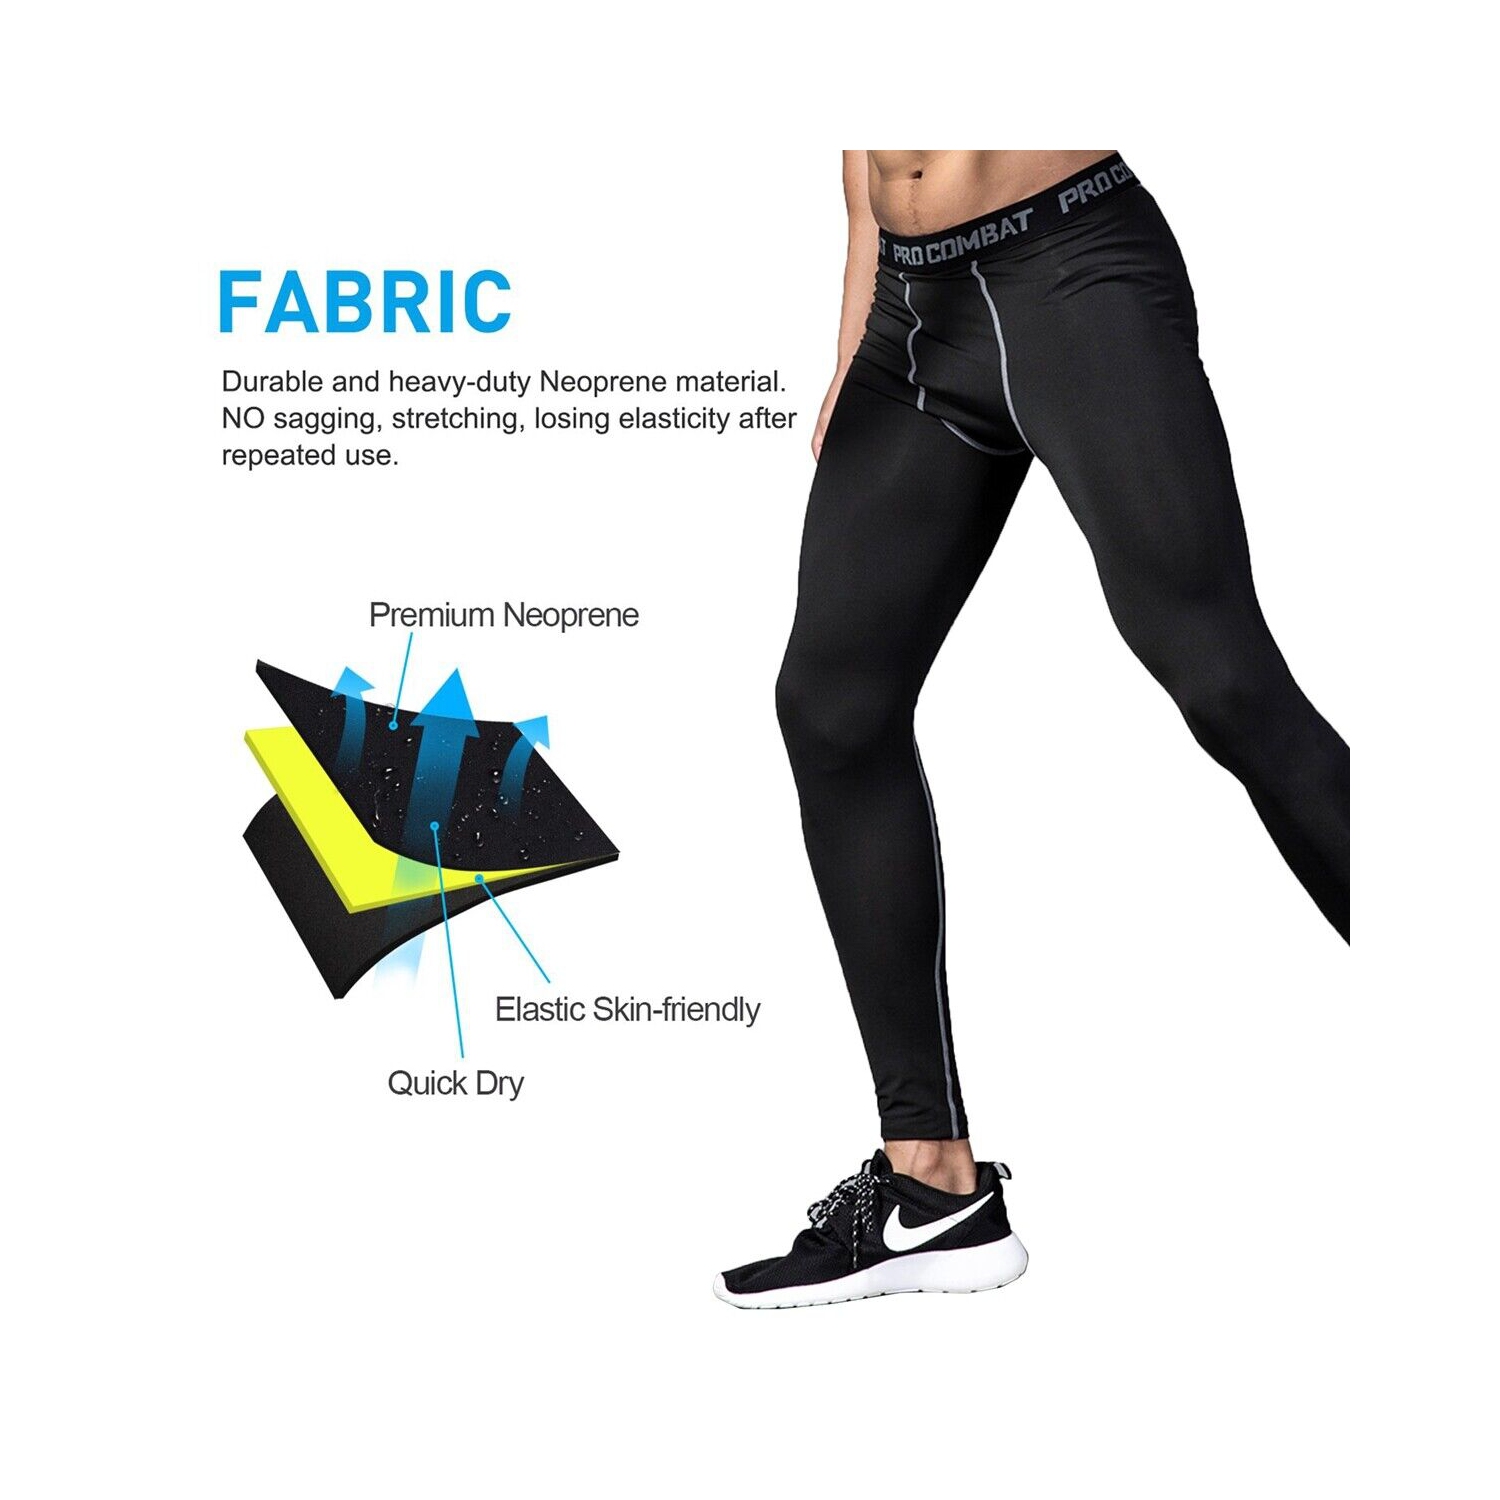 CA Mens Running Compression Leggings Active Base Layer Bottoms